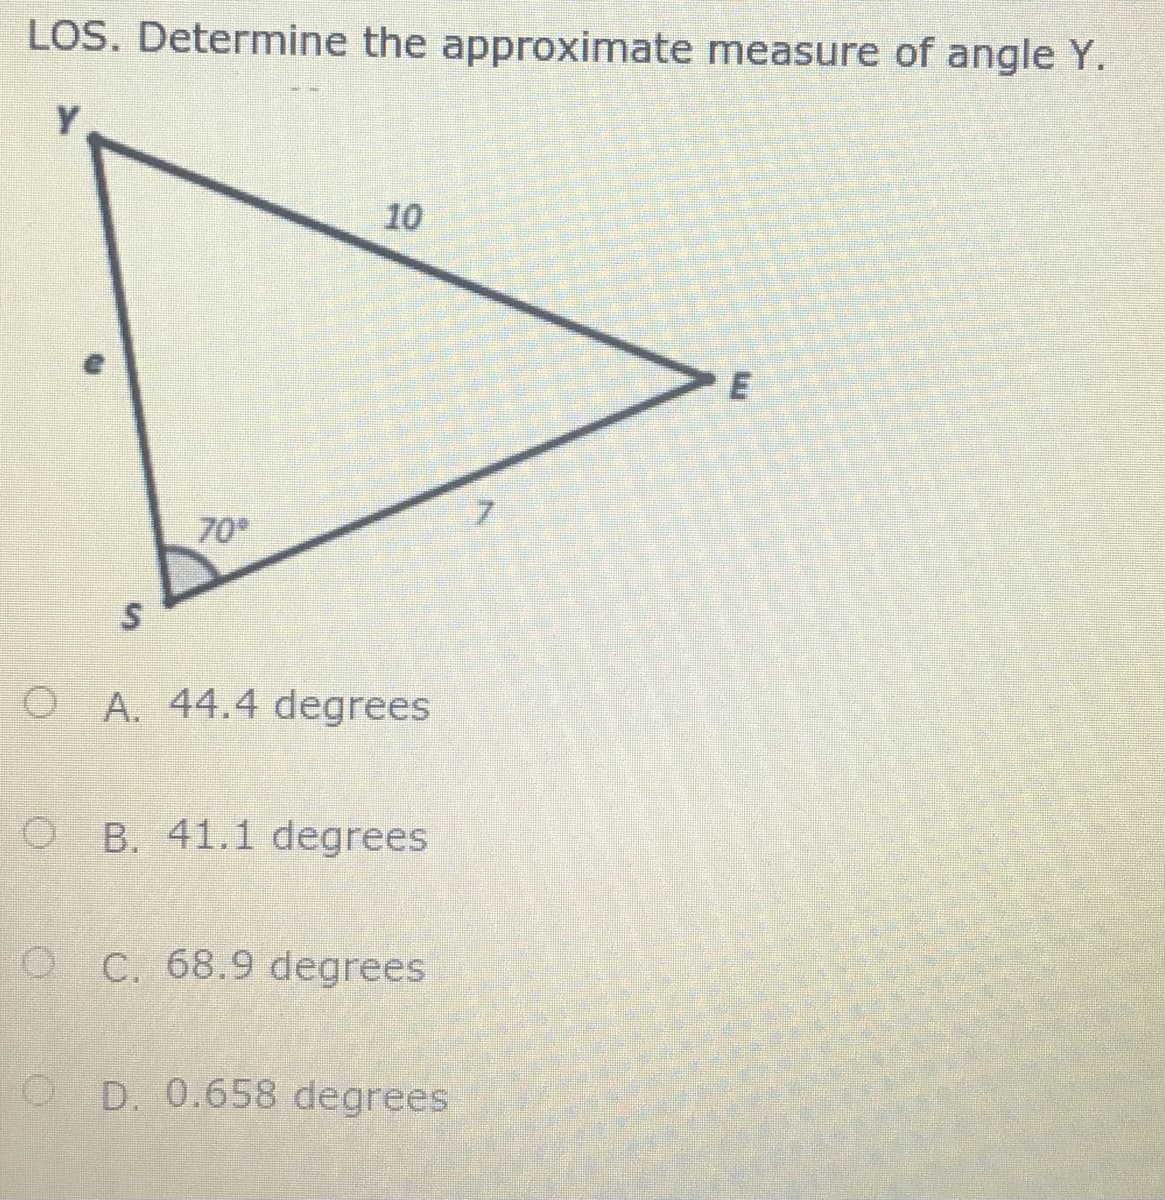 LOS. Determine the approximate measure of angle Y.
Y
10
7.
70
O A. 44.4 degrees
O B. 41.1 degrees
O C. 68.9 degrees
O D. 0.658 degrees
